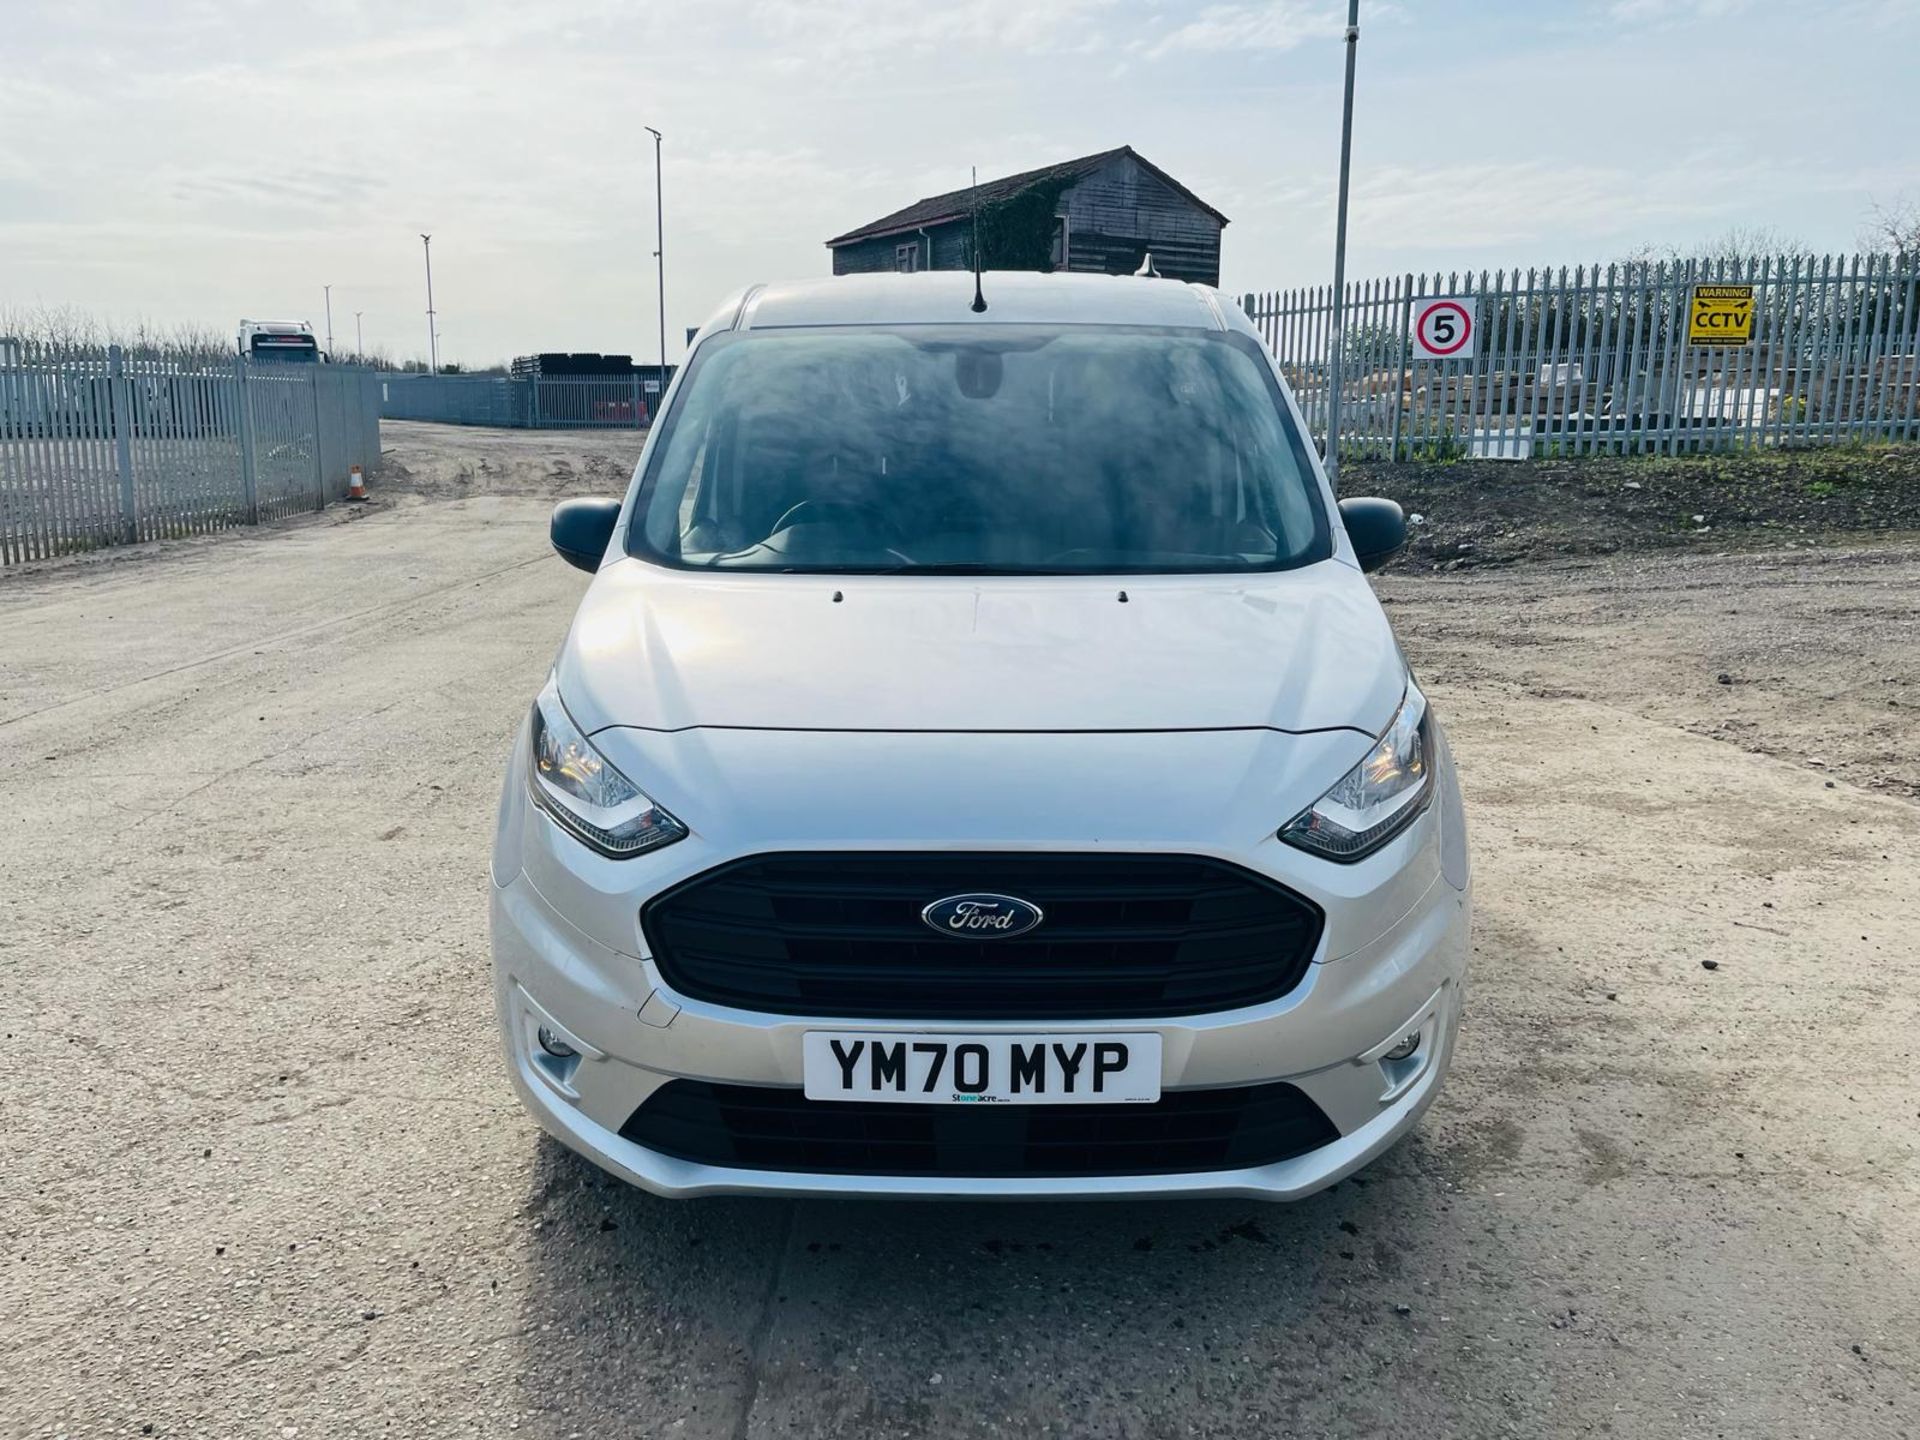 Ford Transit Connect 1.5 TDCI L1H1-2020 '70 Reg'- 1 Previous Owner -Alloy Wheels -Sat Nav - A/C - Image 2 of 28